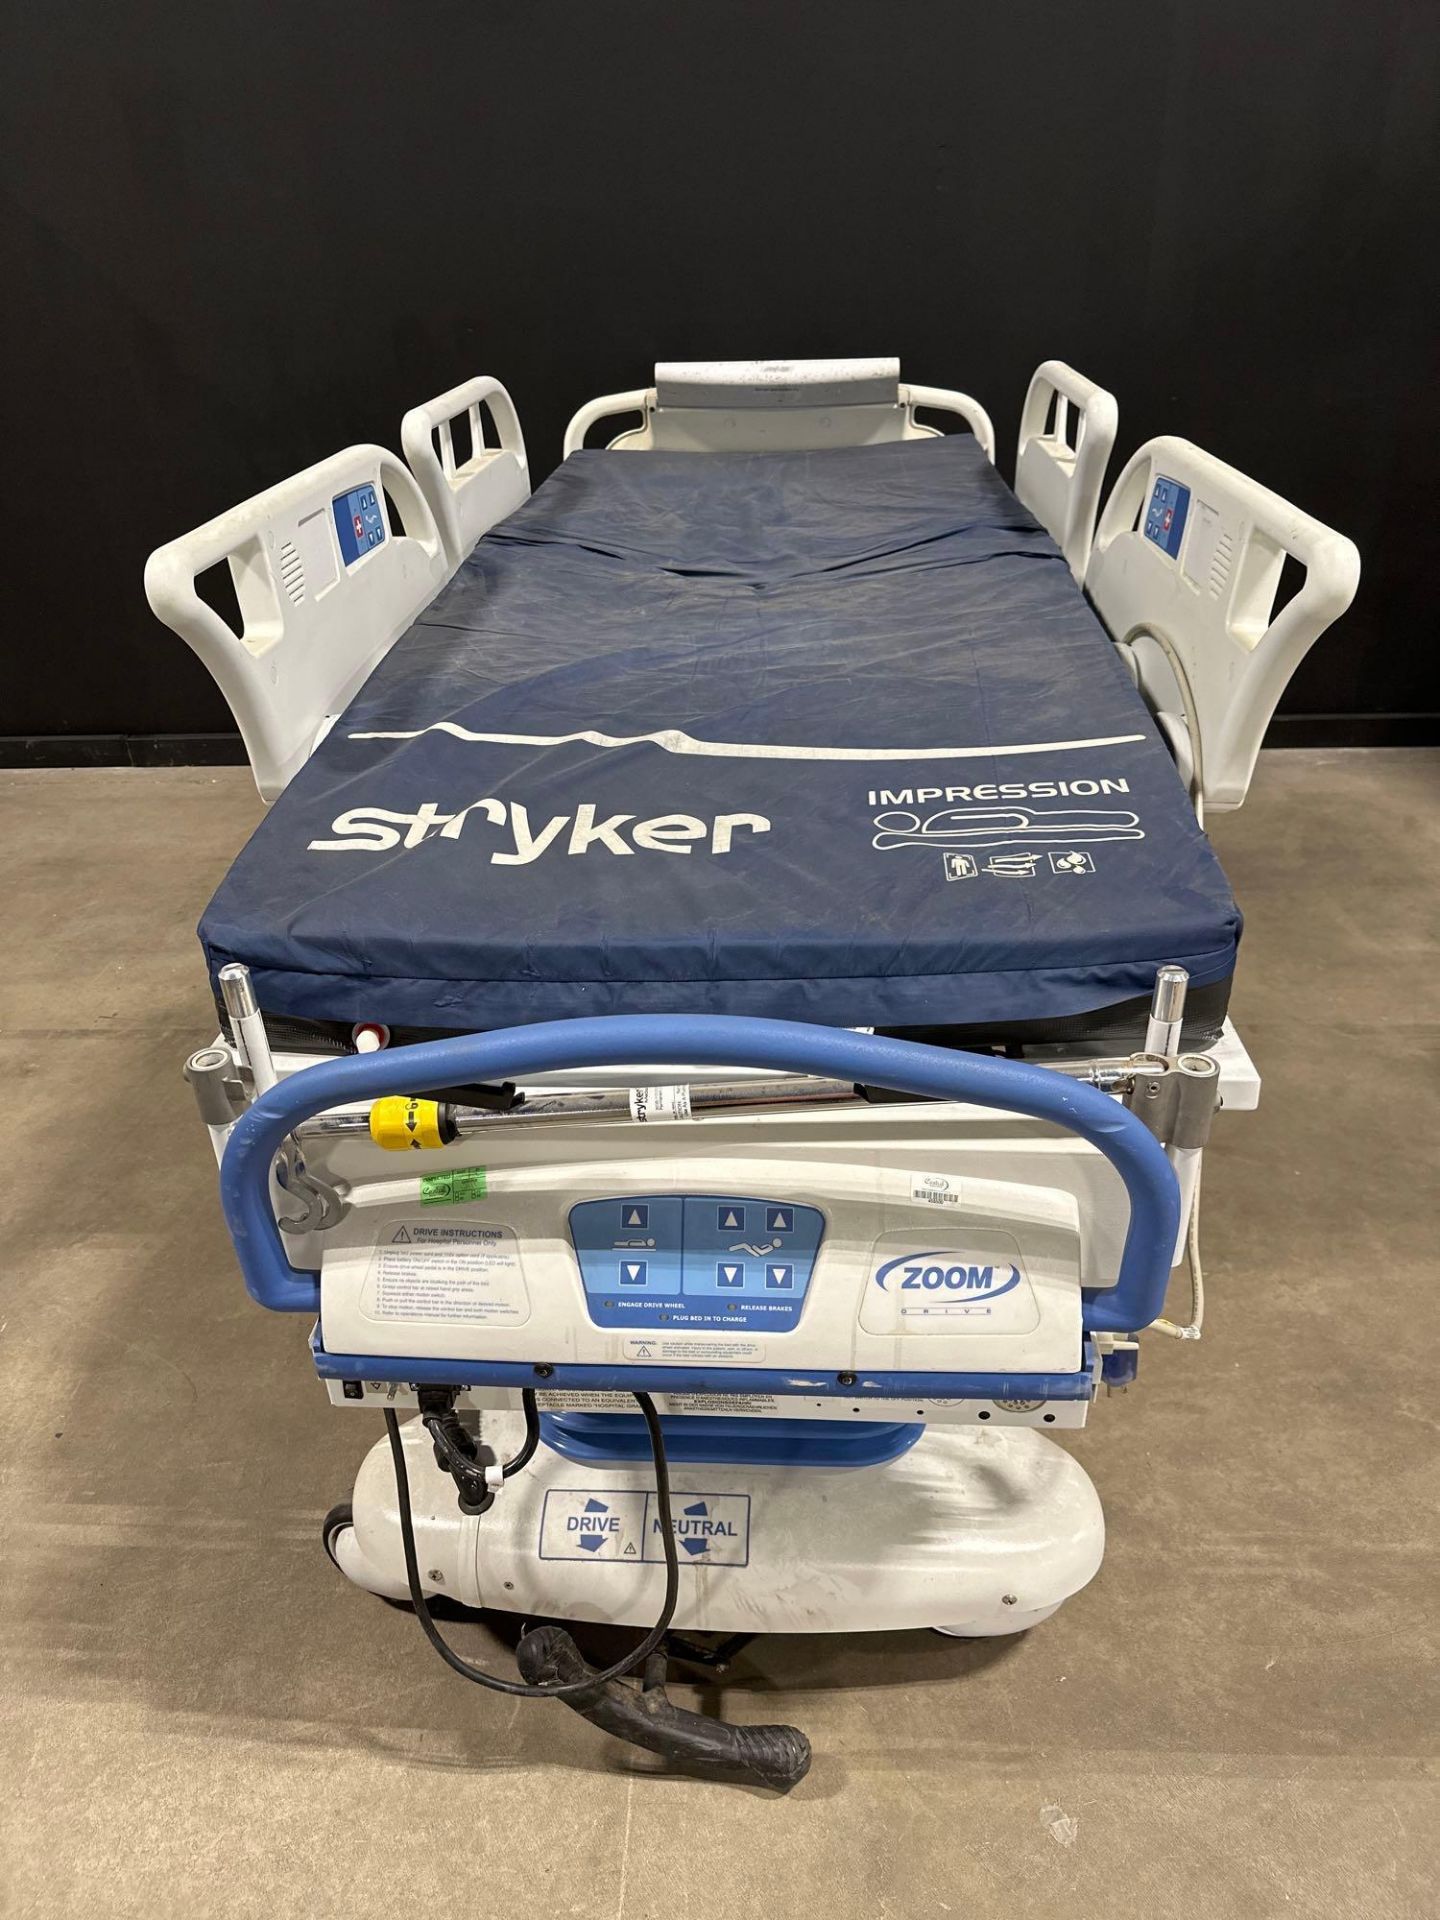 STRYKER 3002 S3 ZOOM HOSPITAL BED - Image 4 of 4